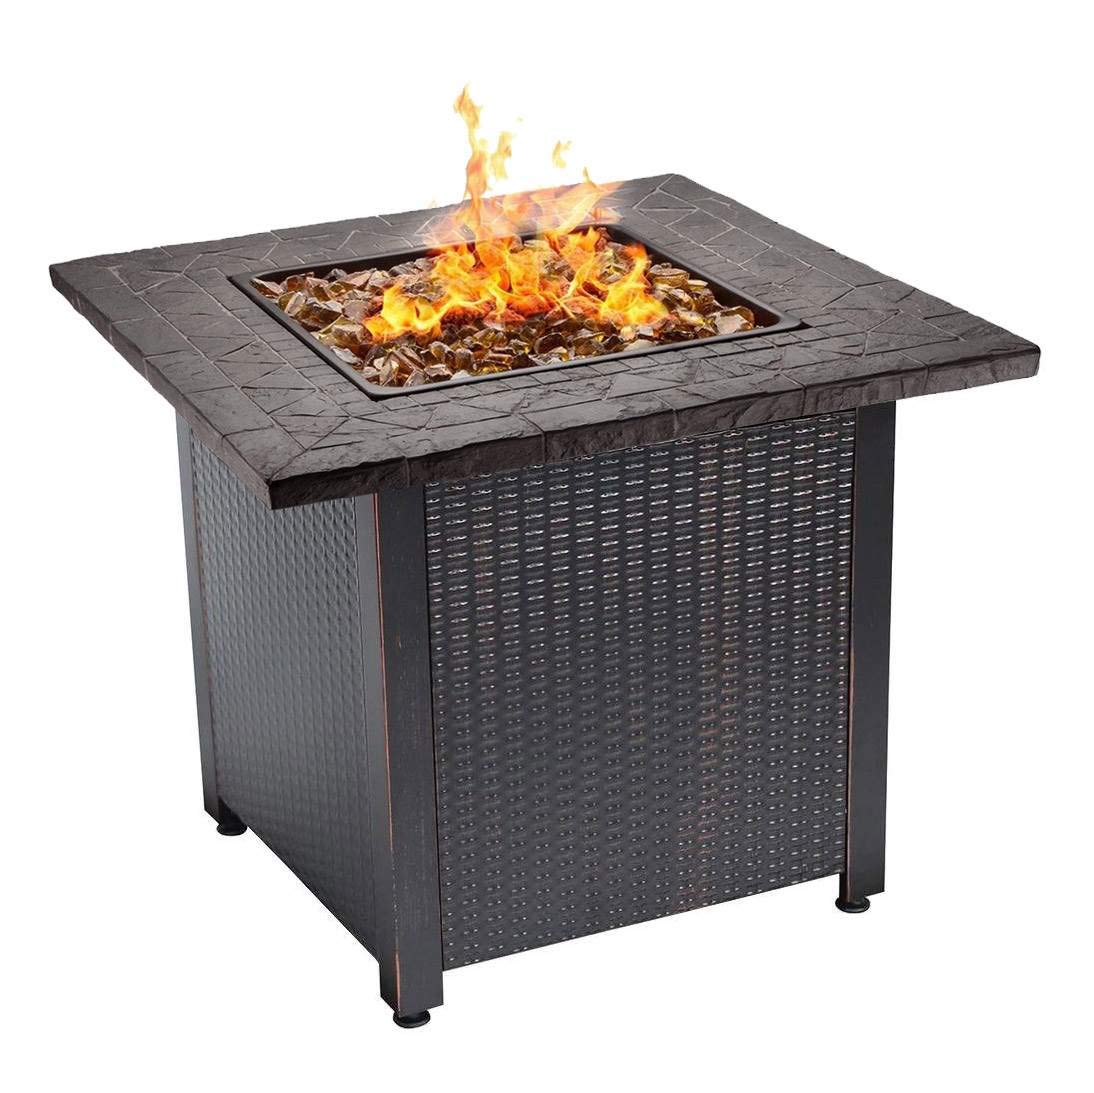 Endless Summer Outdoor Fireplace Lovely Endless Summer Gad1401g Lp Gas Outdoor Fire Table Multicolor